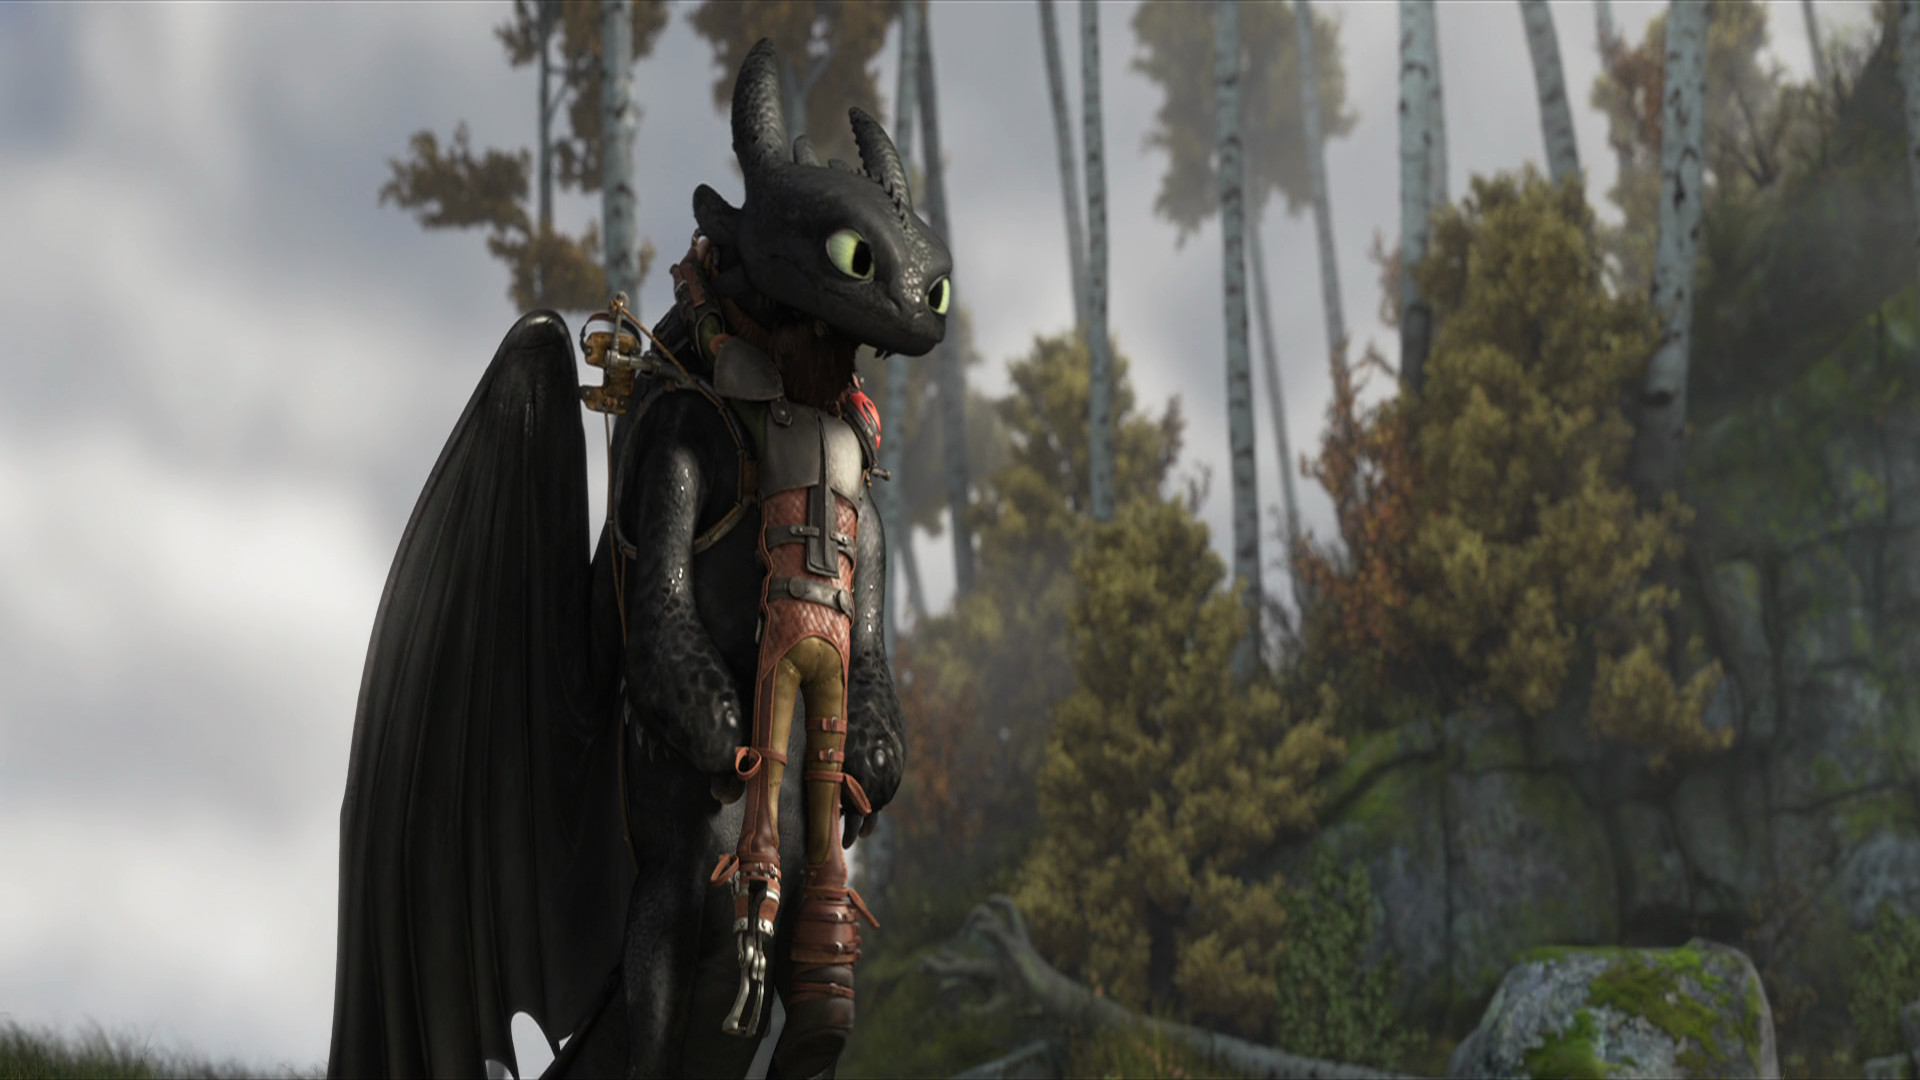 1920x1080 Movie - How to Train Your Dragon 2 Hiccup (How to Train Your Dragon)